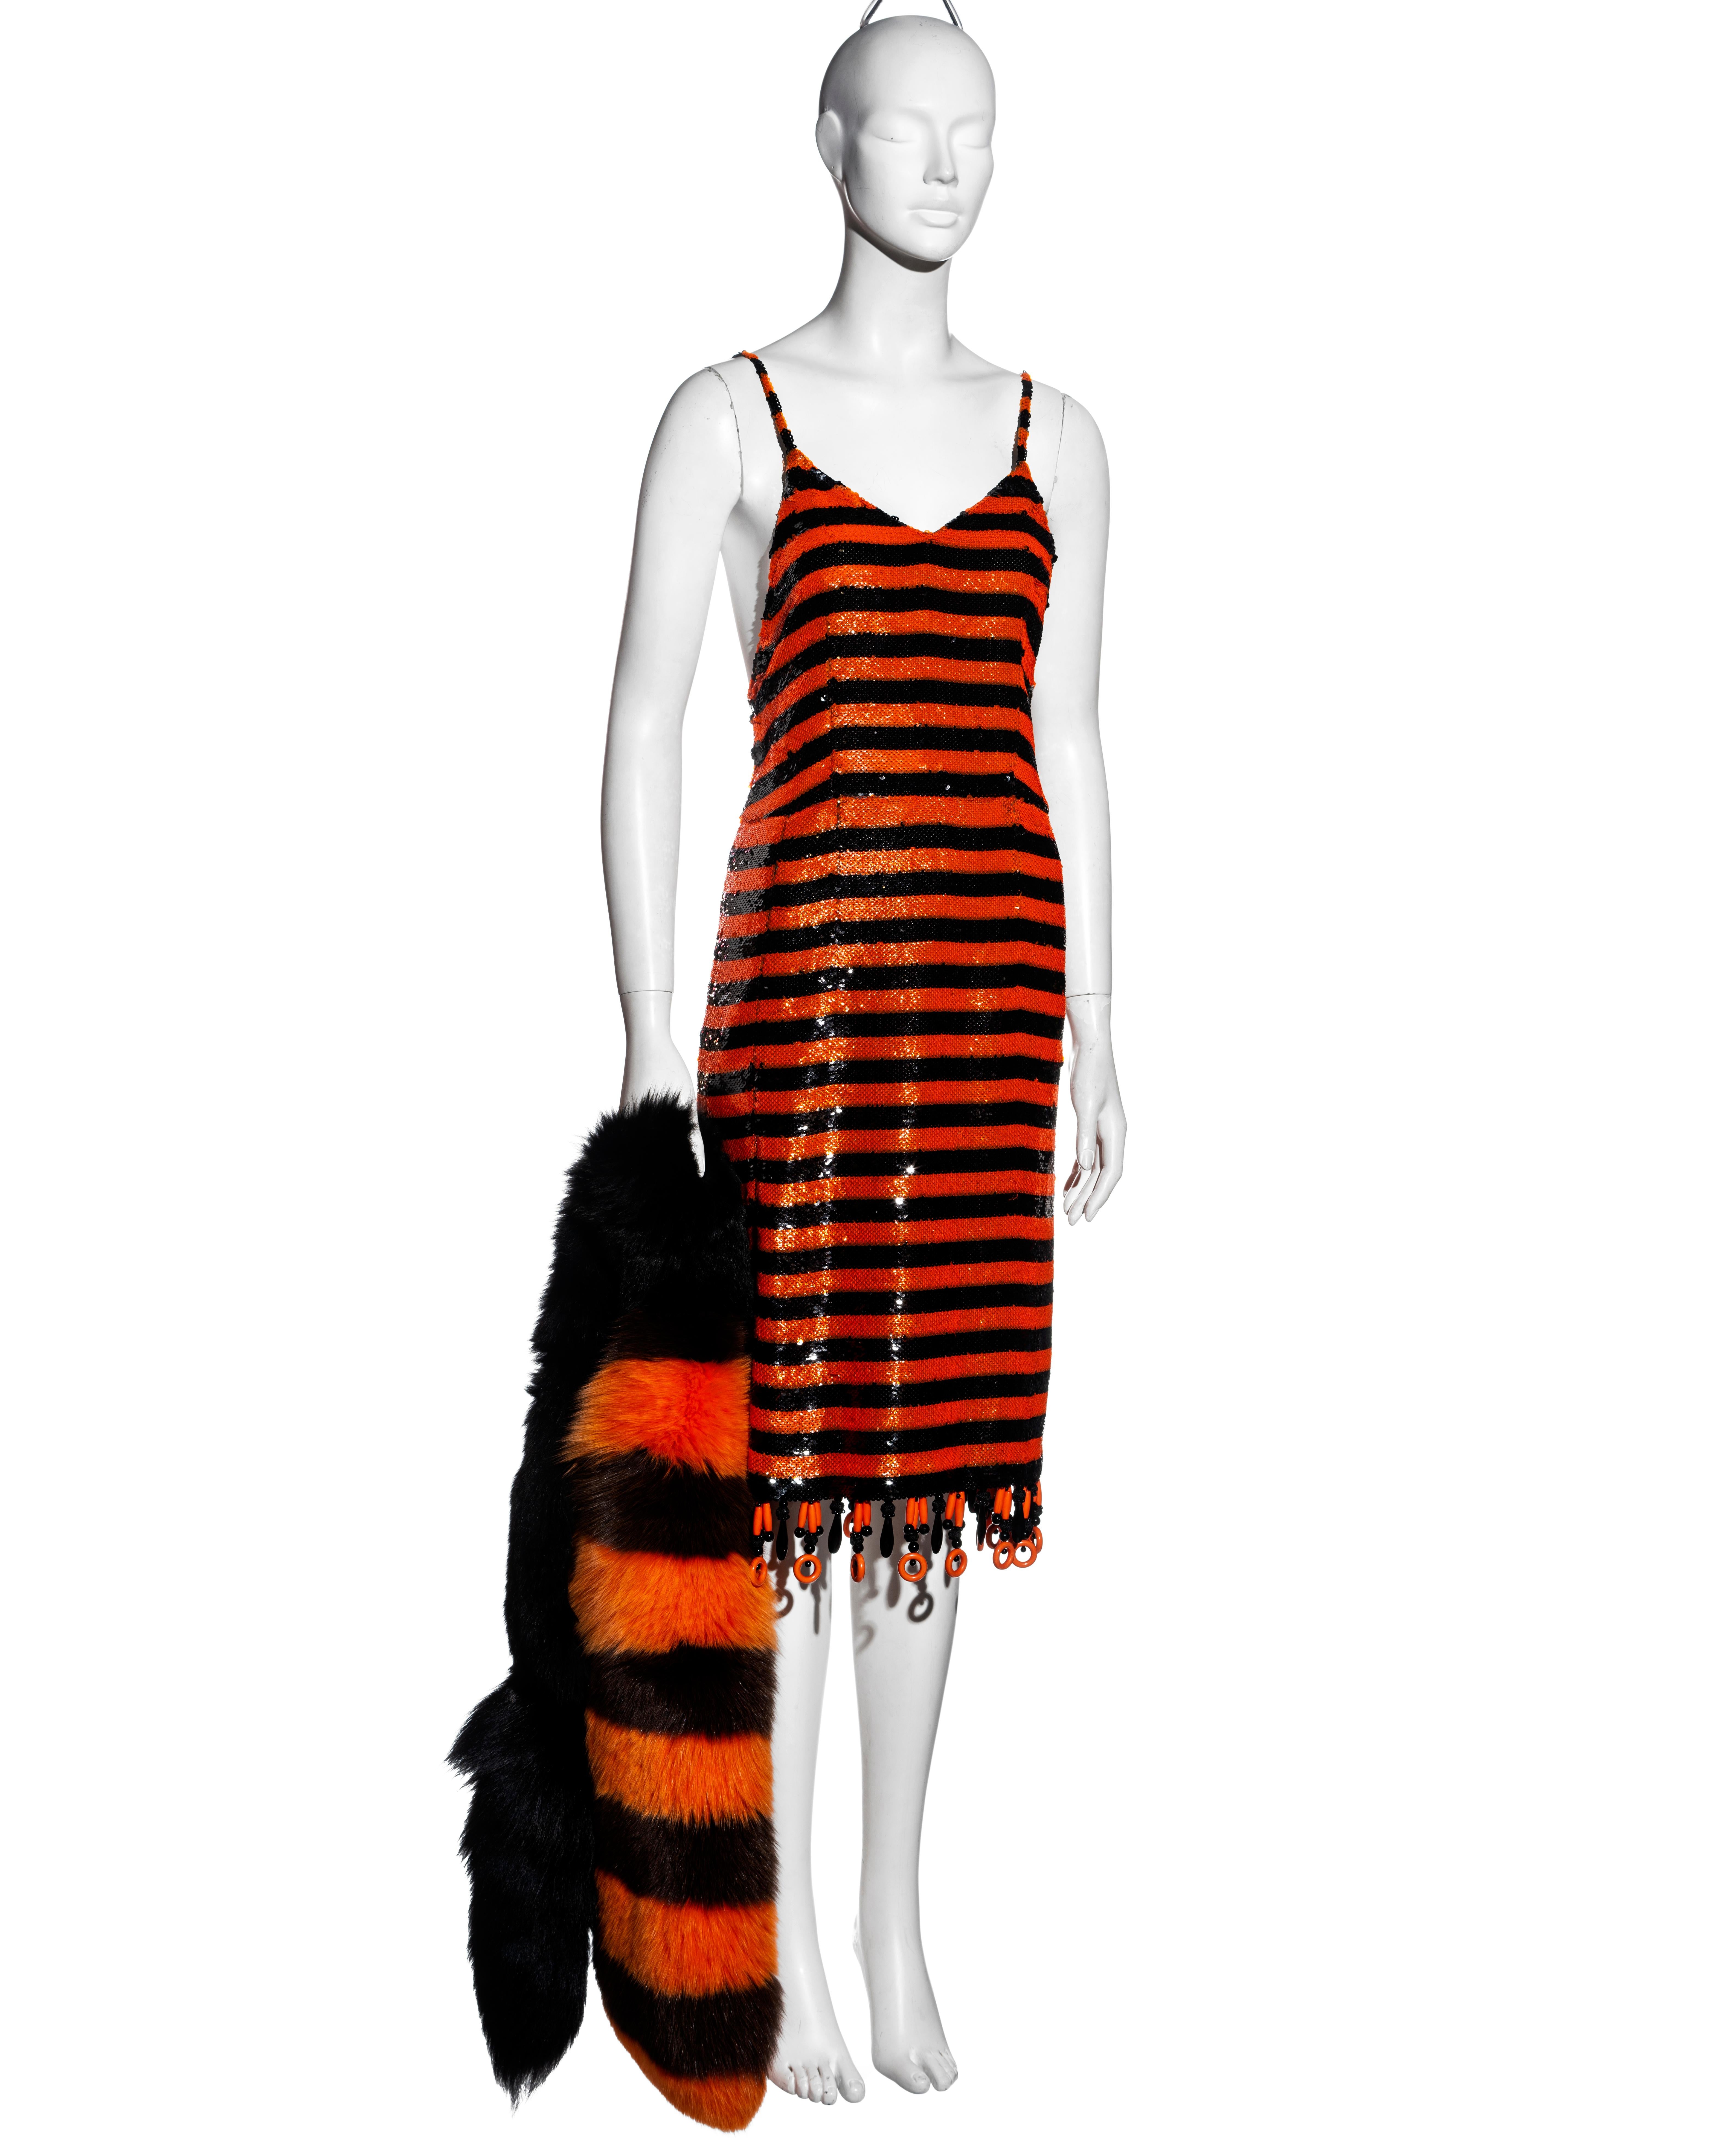 ▪ Prada orange and black striped sequin flapper dress
▪ Designed by Miuccia Prada as an exclusive piece for the Beijing SS 2011 collection 
▪ Sold with the matching large fox fur stole; an important piece of the collection
▪ Beaded tassel trim 
▪